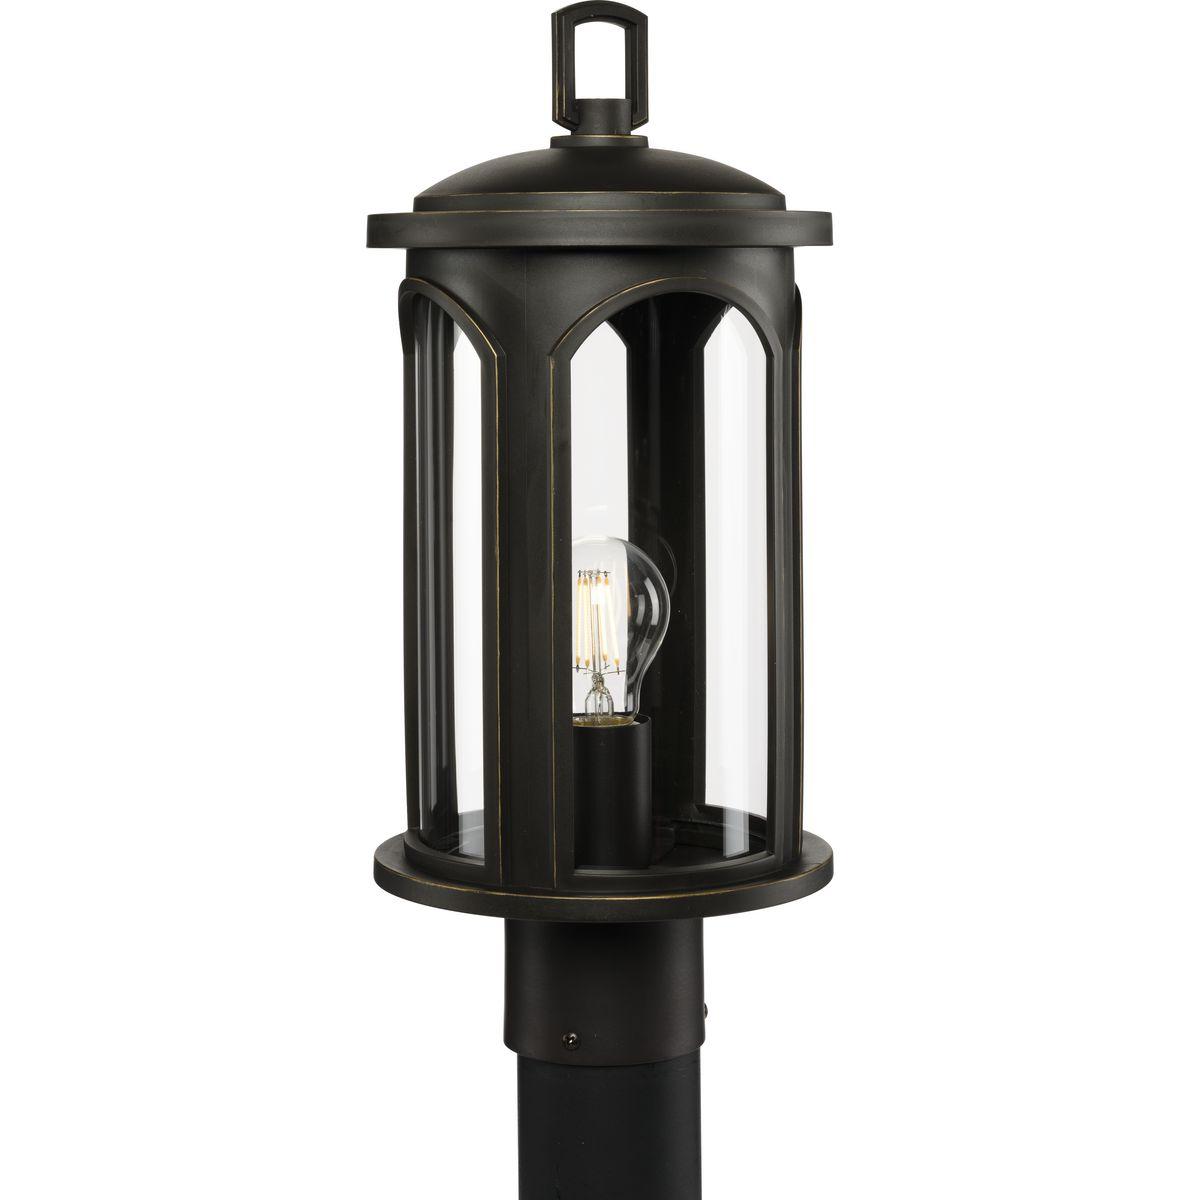 Hubbell P540033-020 Elevate your home decor with the graceful arches of the Gables Collection 1-Light Antique Bronze Clear Glass Traditional Outdoor Post Lantern Light. The lantern's stately frame with airy archways is coated in a handsome antique bronze frame. A light sourc